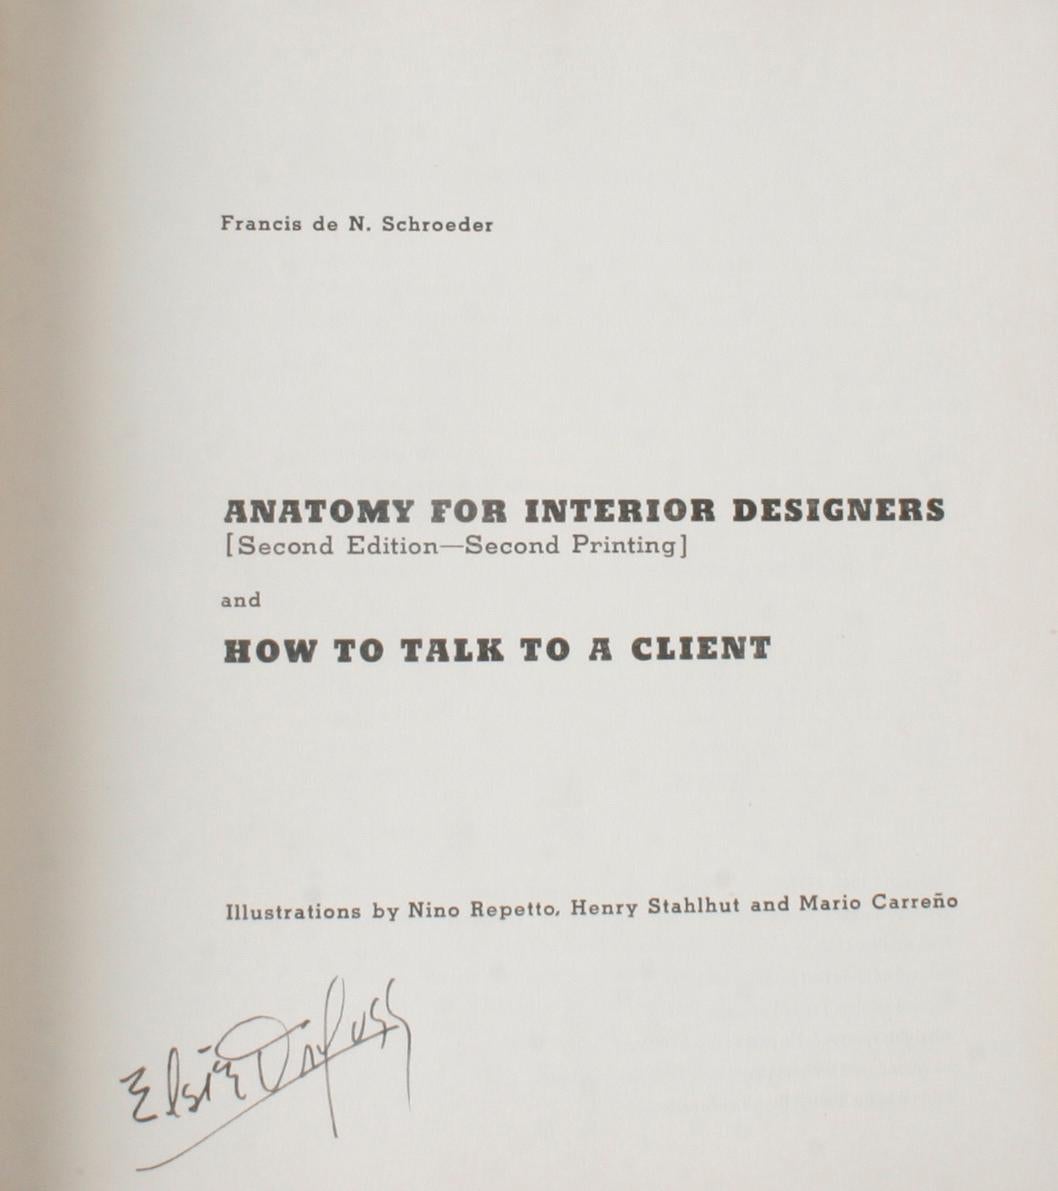 ‘Anatomy for Interior Designers’ and ‘How to Talk to a Client’, by Francis de N. Schroeder. Whitney Publications Inc, New York, 1954. 2nd Ed, 2nd printing hardcover no dust jacket. A humorous but very practical guide for interior designers about